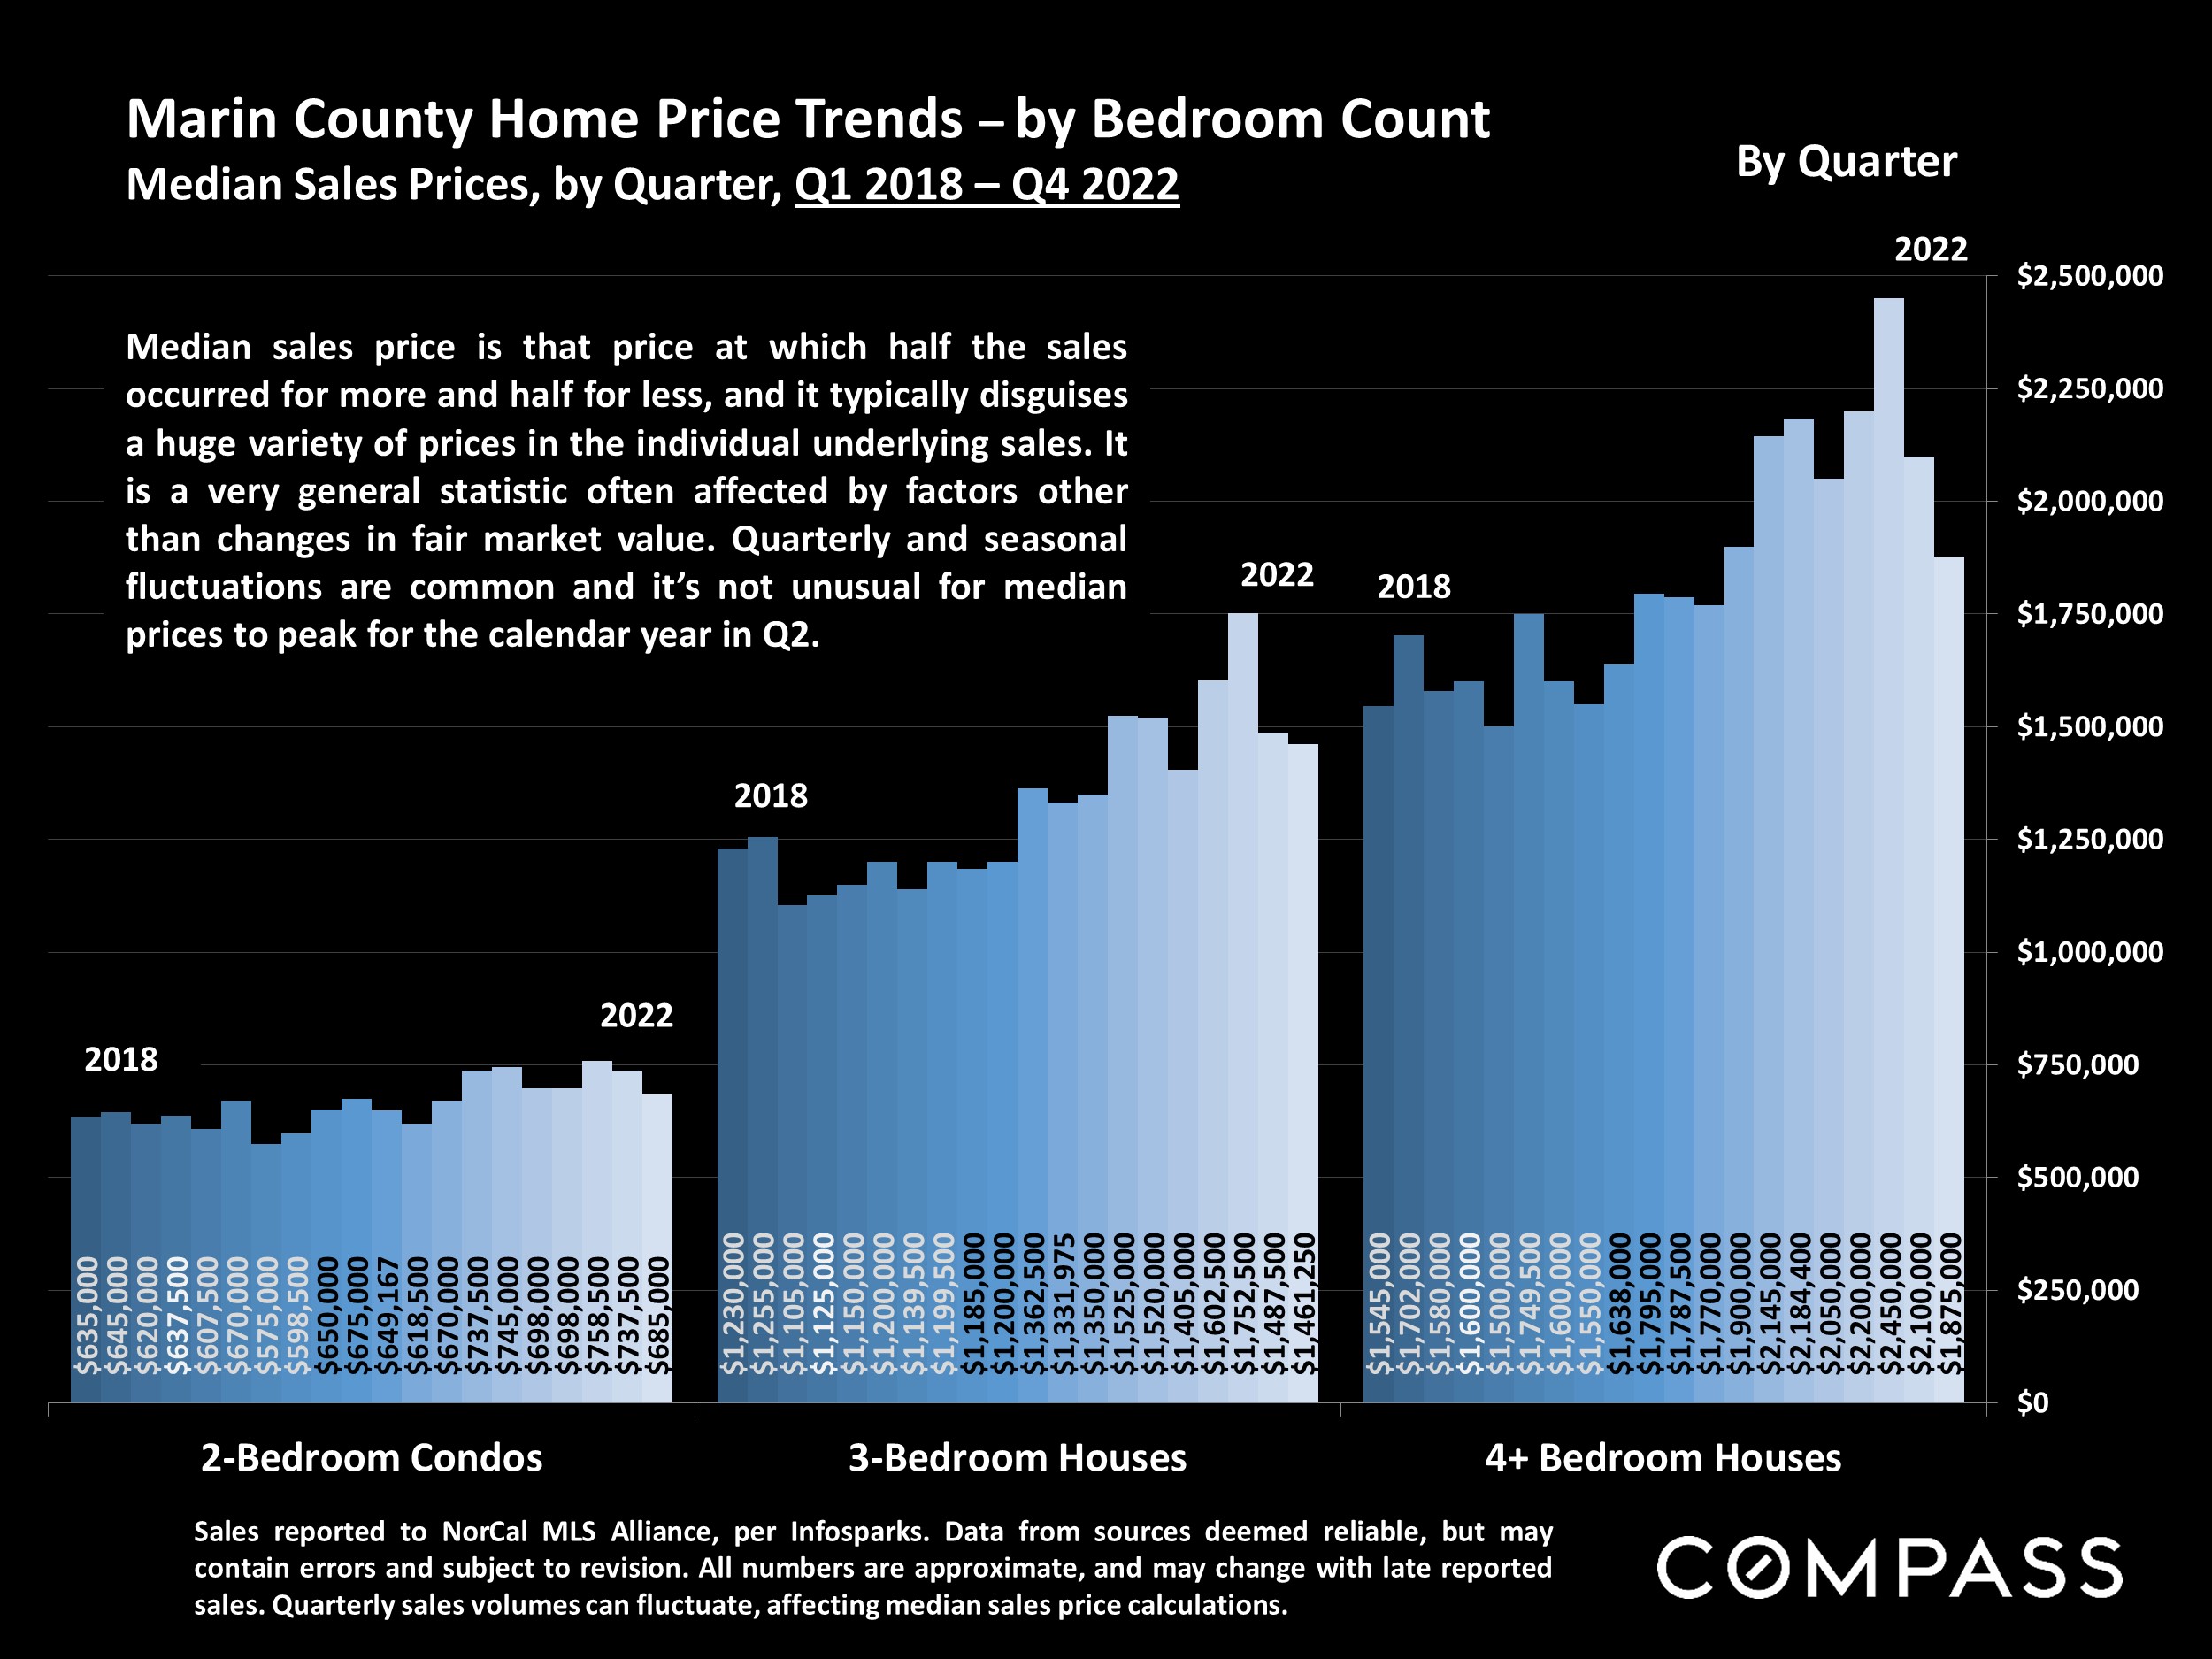 Marin County Home Price Trends - by Bedroom Count Median Sales Prices, by Quarter, 01 2018 - 04 2022